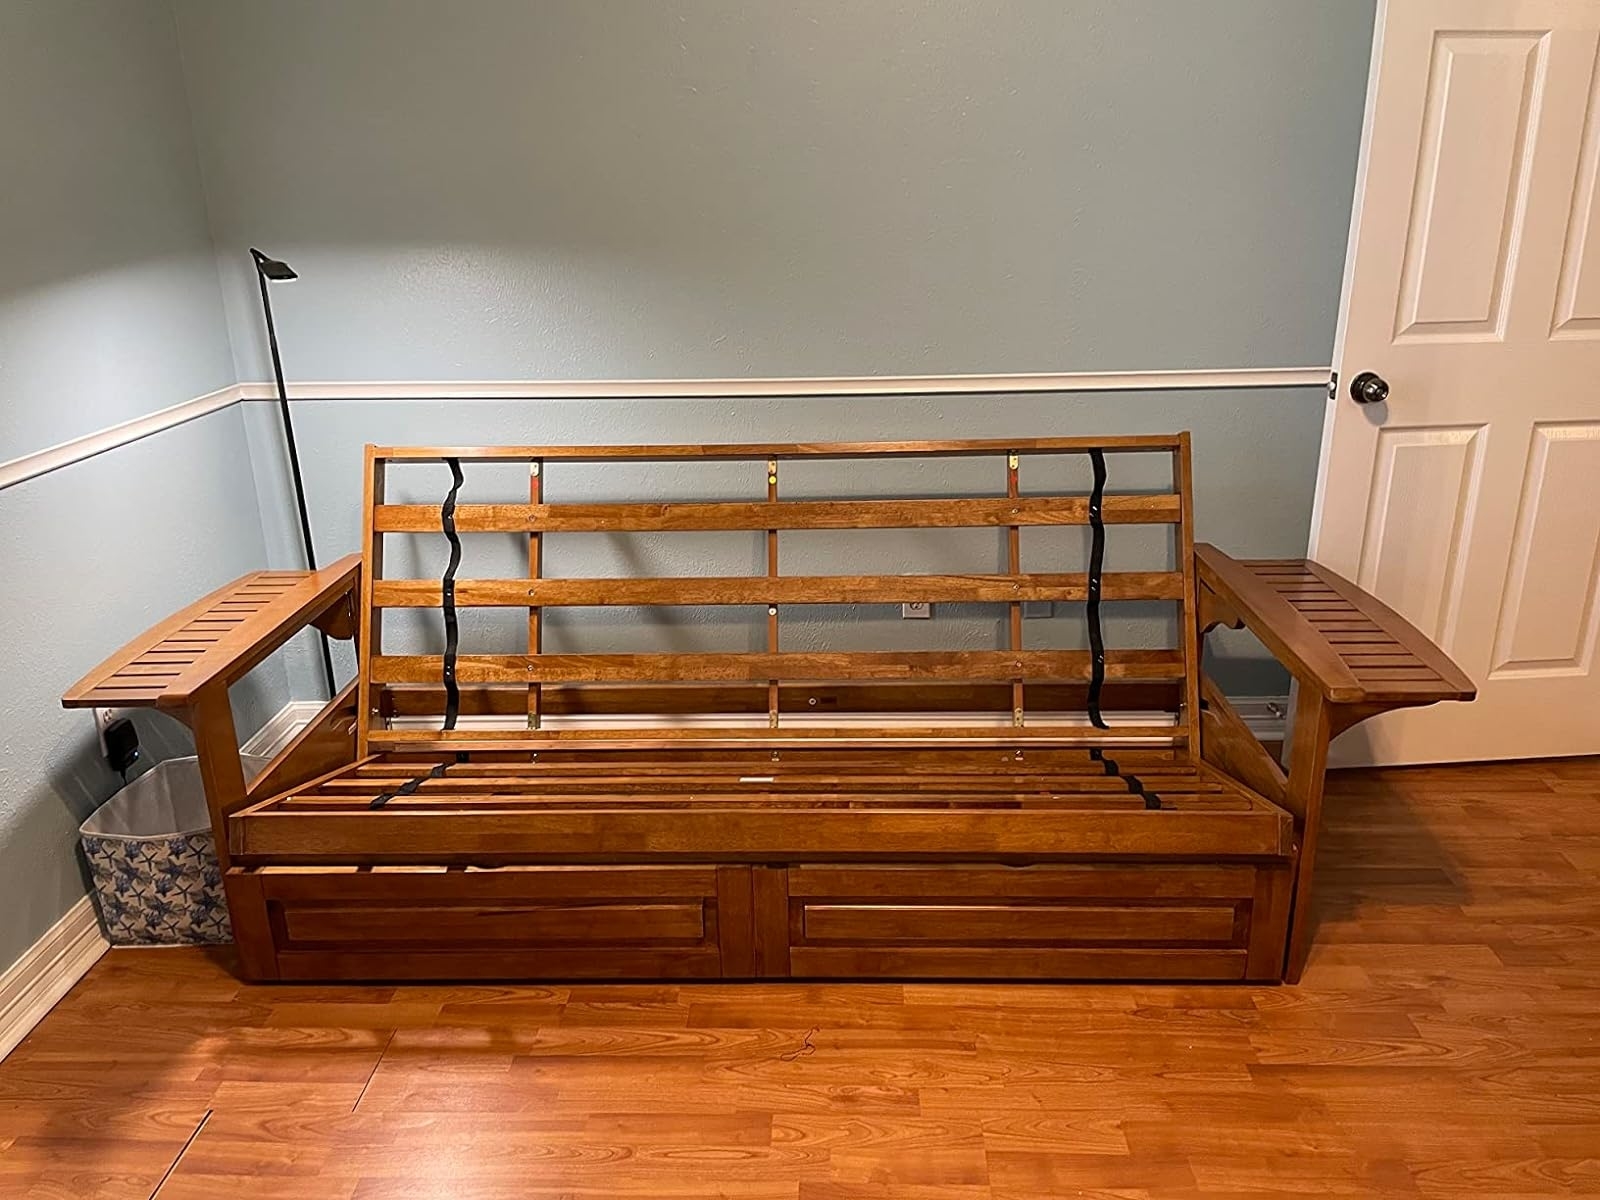 Wooden futon frame with side trays in a room, convertible into a bed, suitable for small spaces